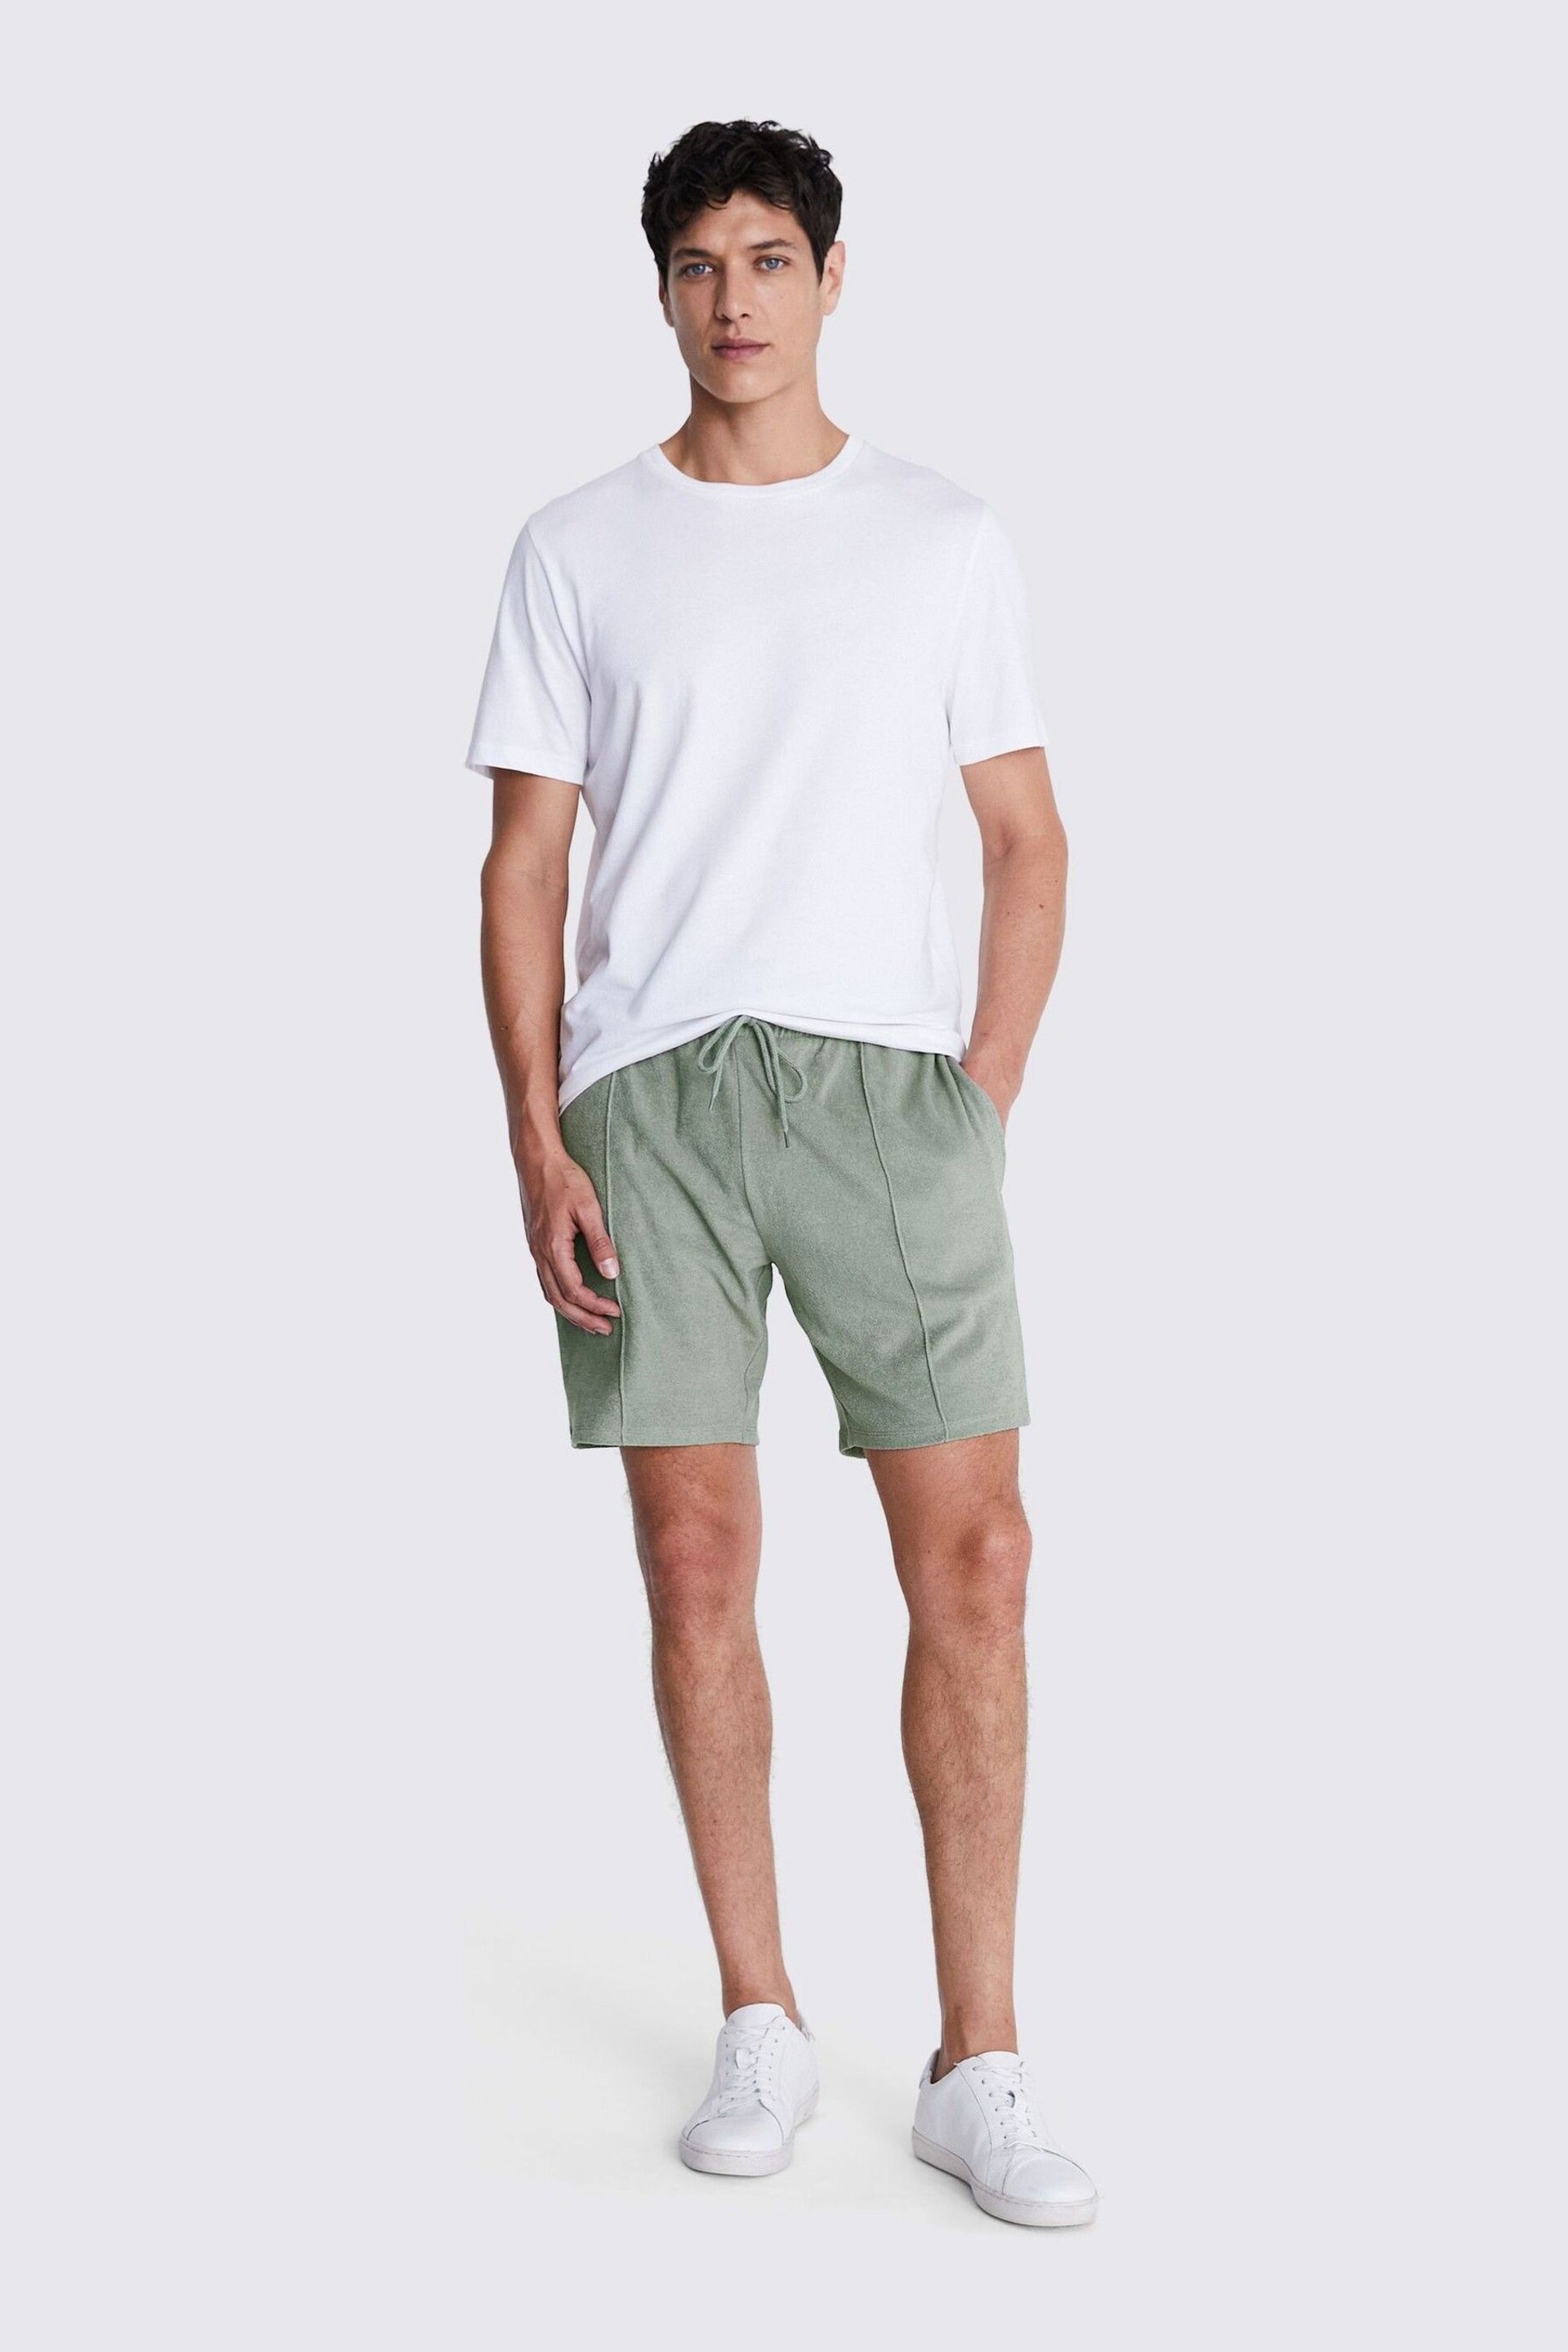 MOSS Green Terry Towelling Shorts - Image 2 of 3